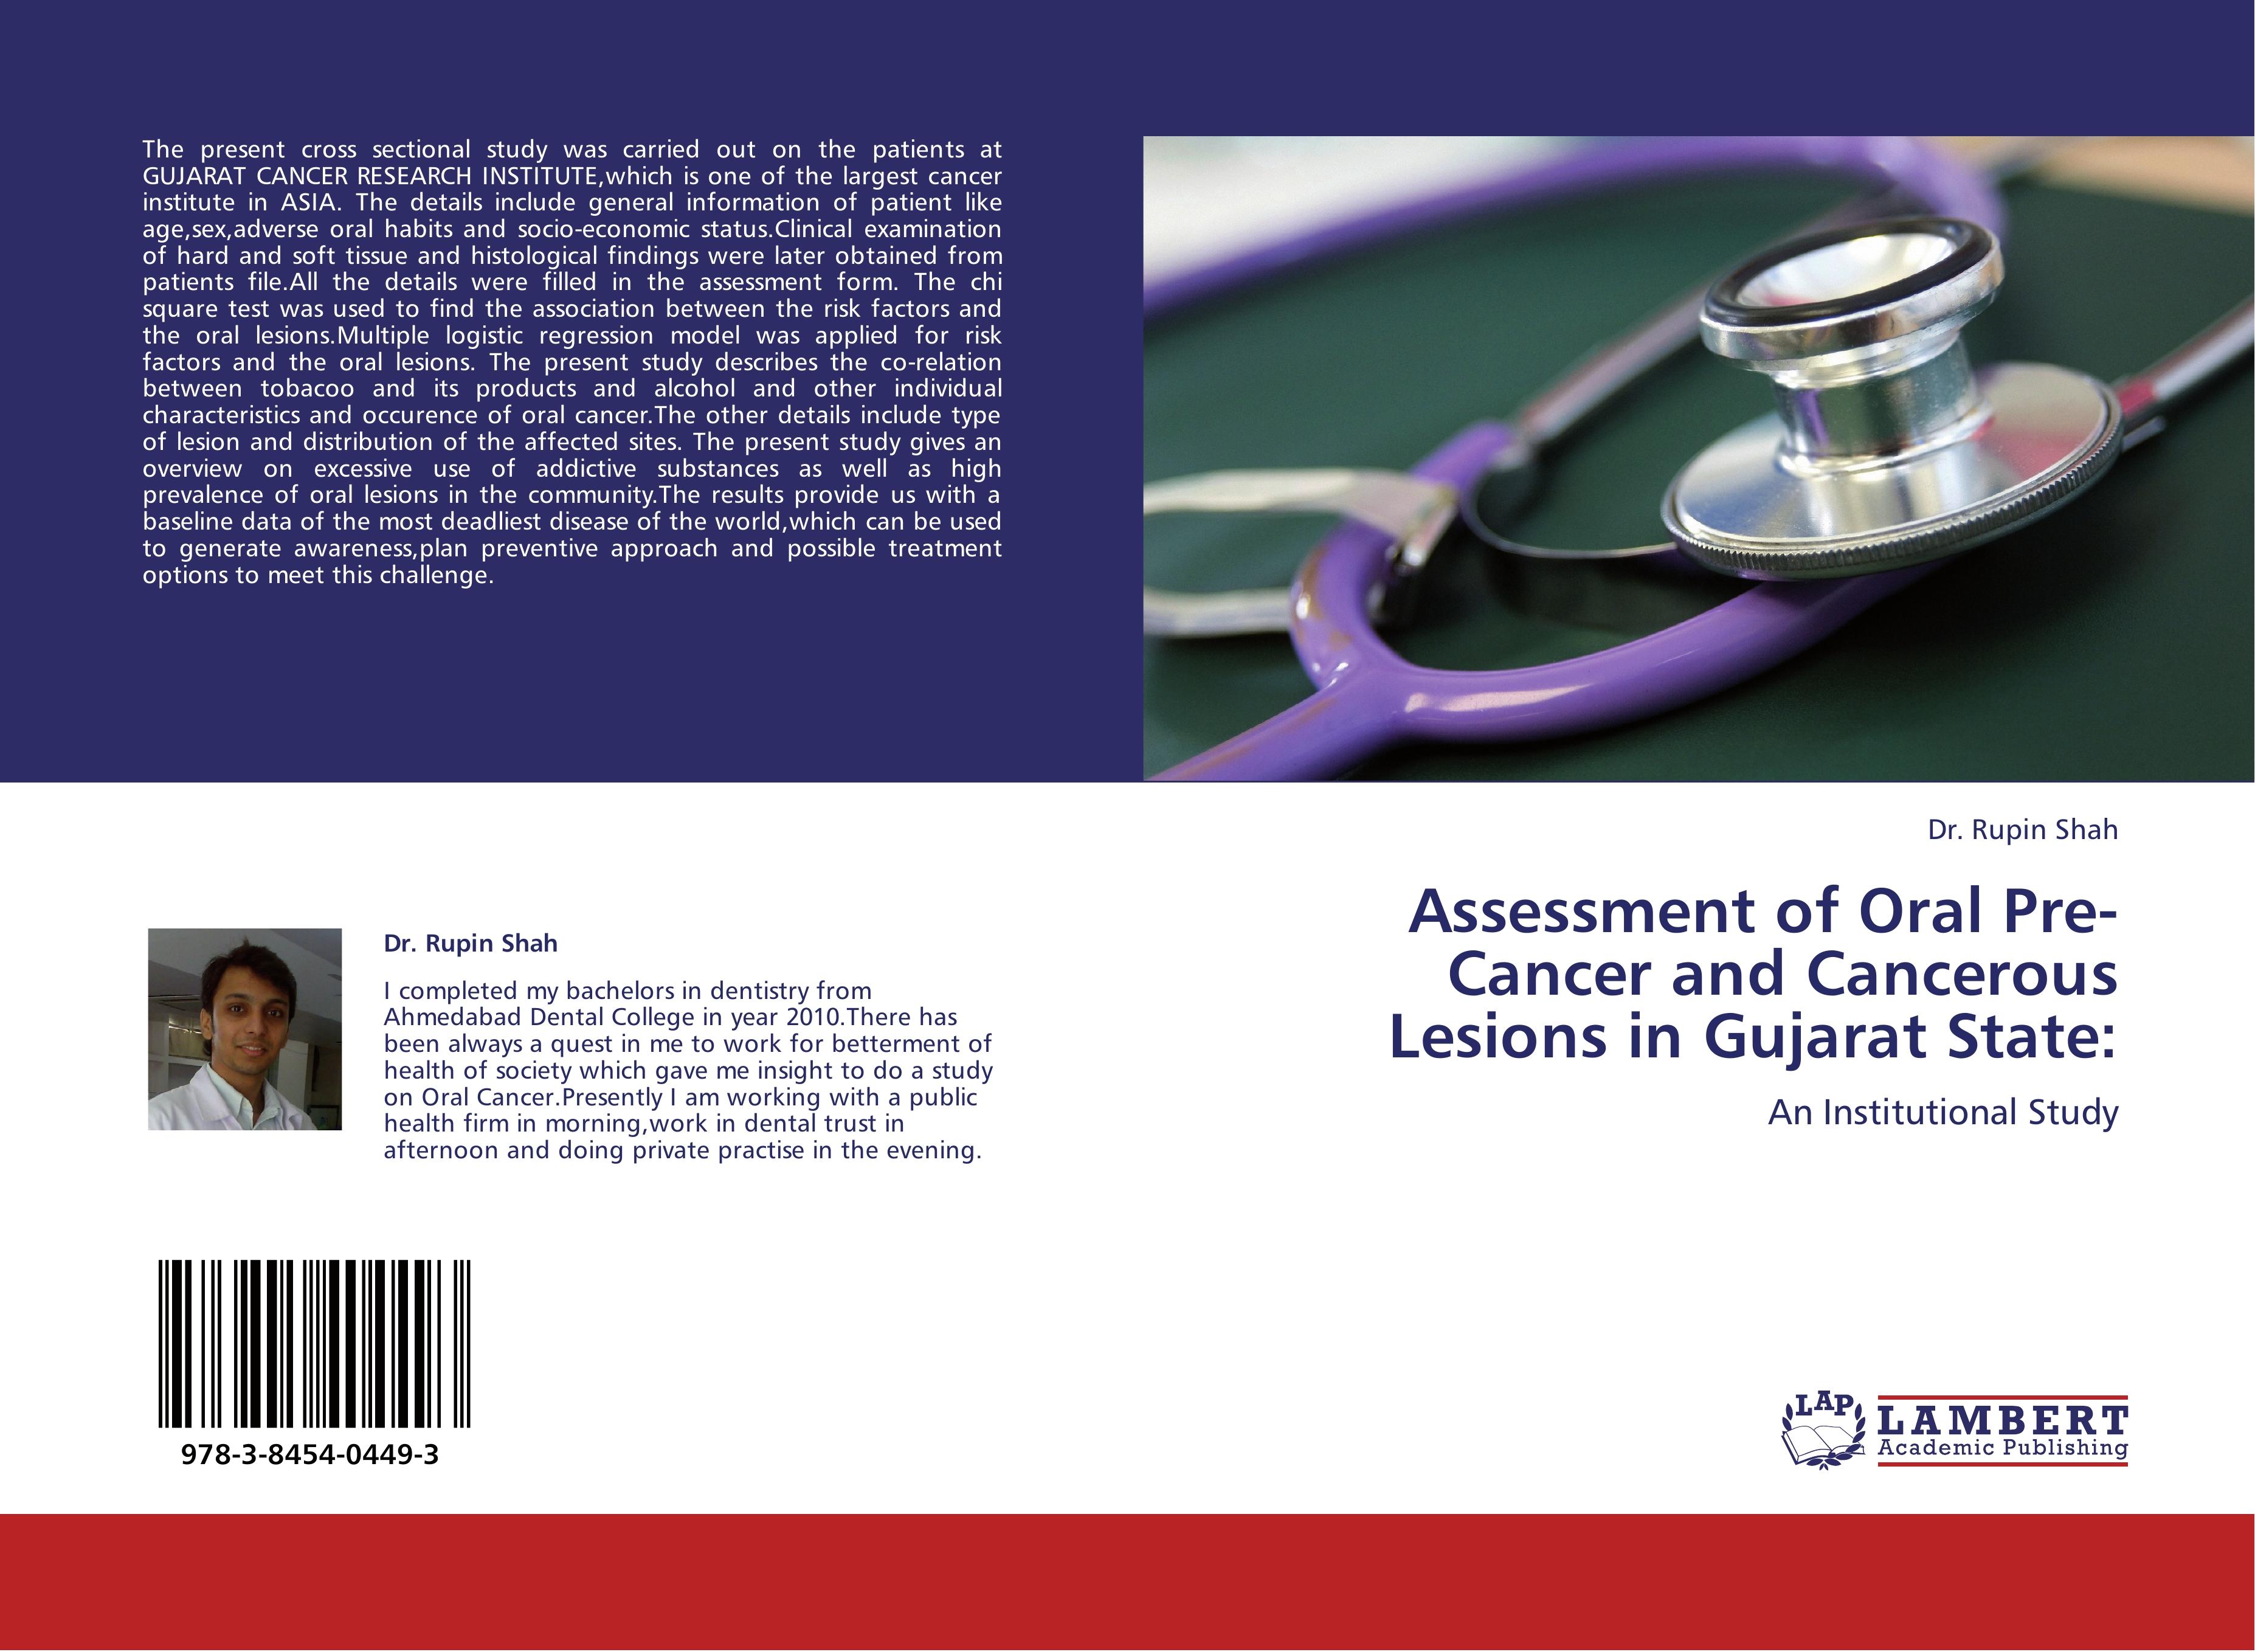 Assessment of Oral Pre-Cancer and Cancerous Lesions in Gujarat State - Dr. Rupin Shah